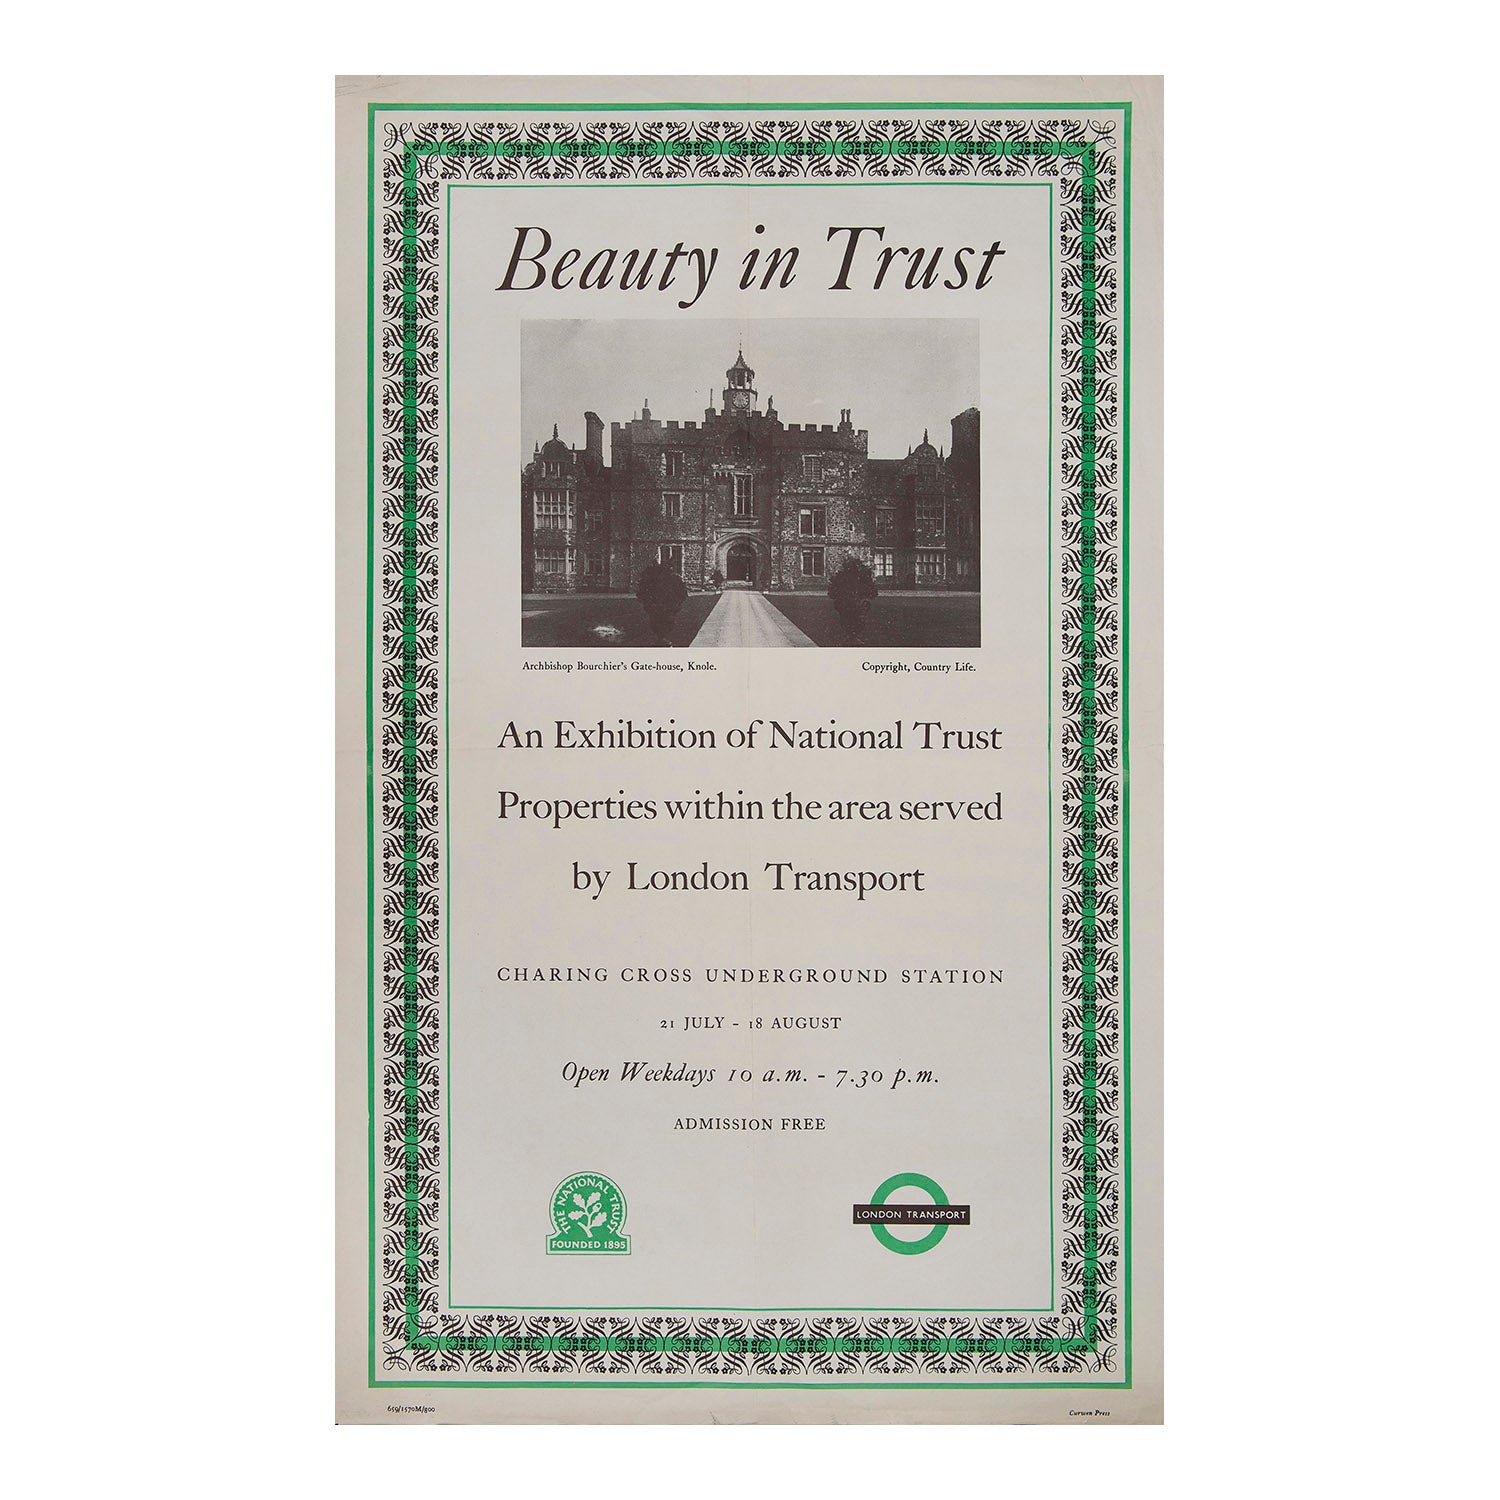 London Transport poster, Beauty in Trust, promoting an exhibition about National Trust properties held at Charing Cross Tube station during July and August 1959. The poster features a photographic image of Archbishop Bourchier's Gate House, Knol